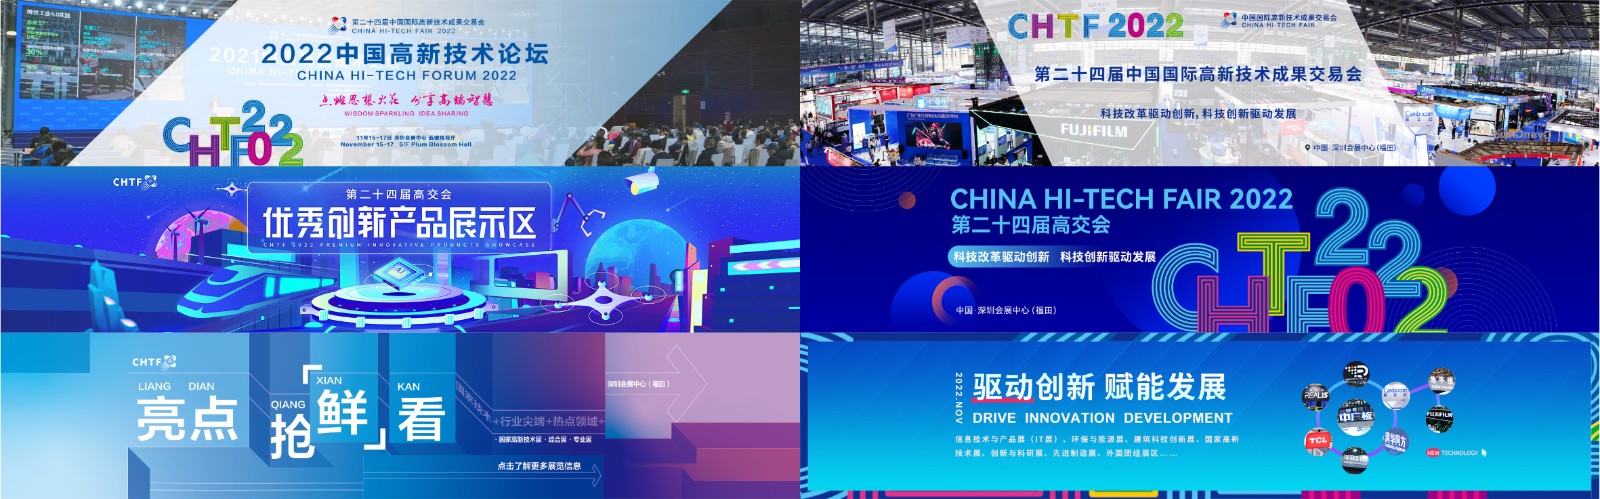 [Company News]Dongguan Zhaoheng Machinery sincerely invites you to participate in the 24th China International High-tech Achievement Fair